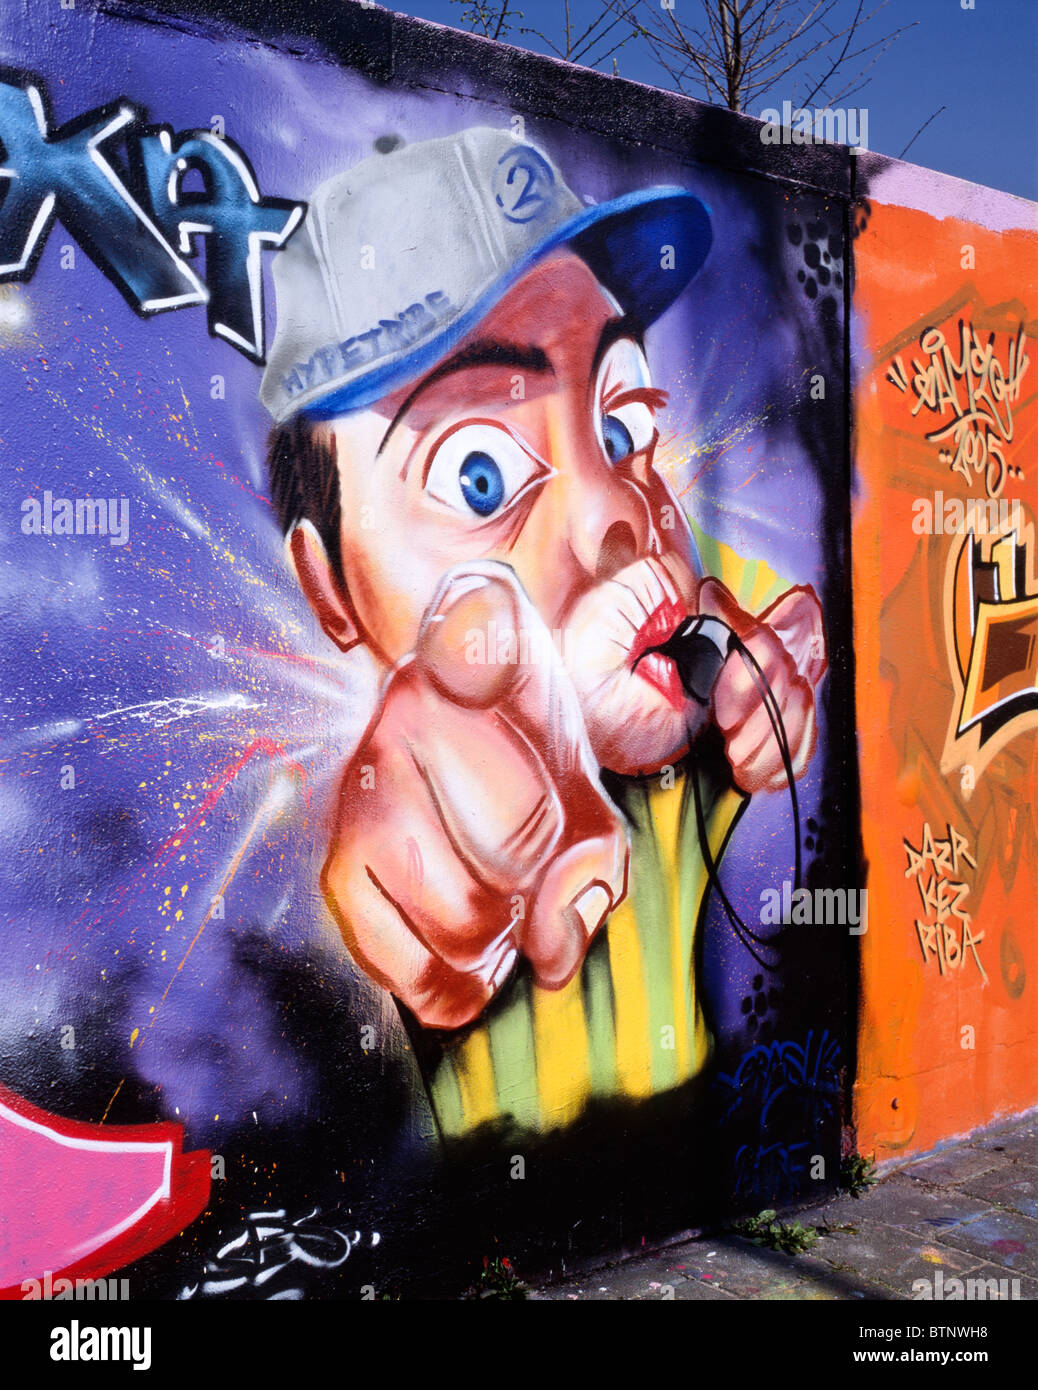 Graffiti of a man with a base cap pointing his index finger at the observer  / viewer while blowing into a whistle, Delft Stock Photo - Alamy